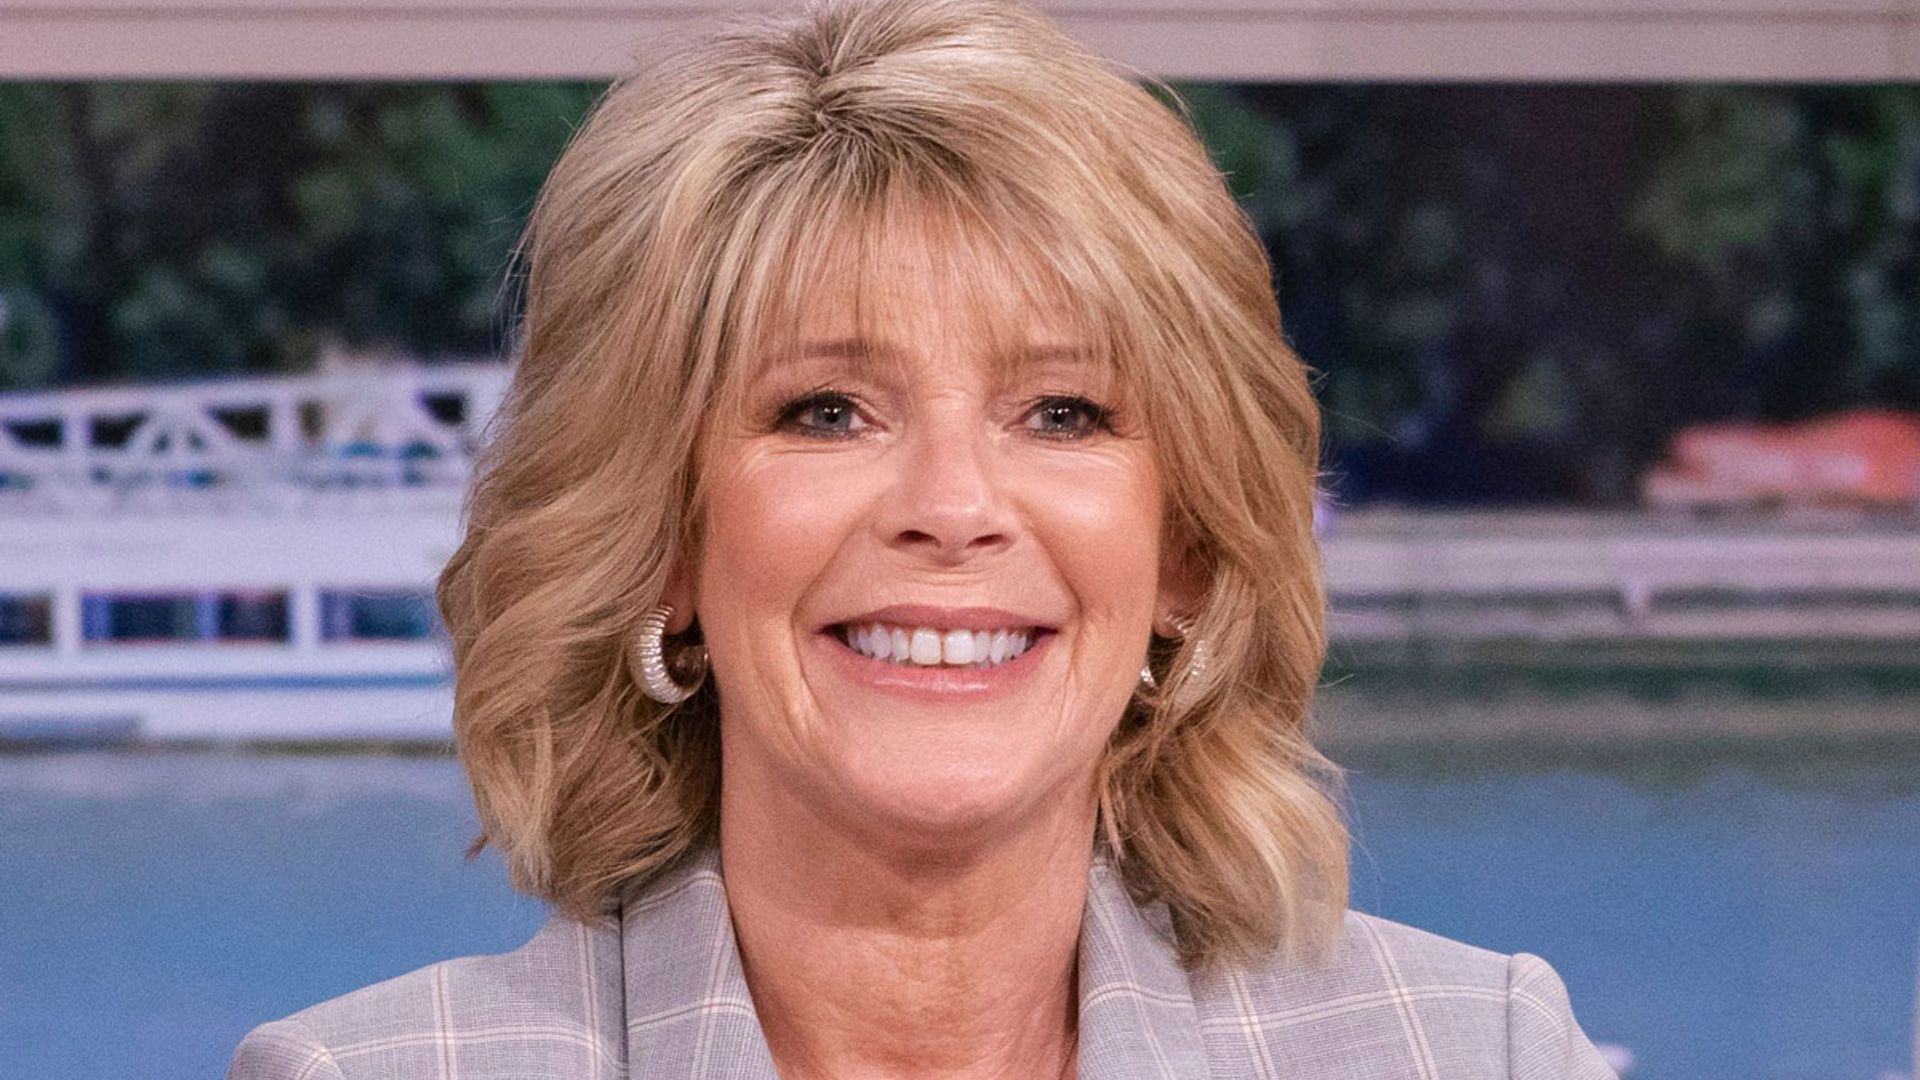 Ruth Langsford causes a stir in skinny jeans – and looks incredible